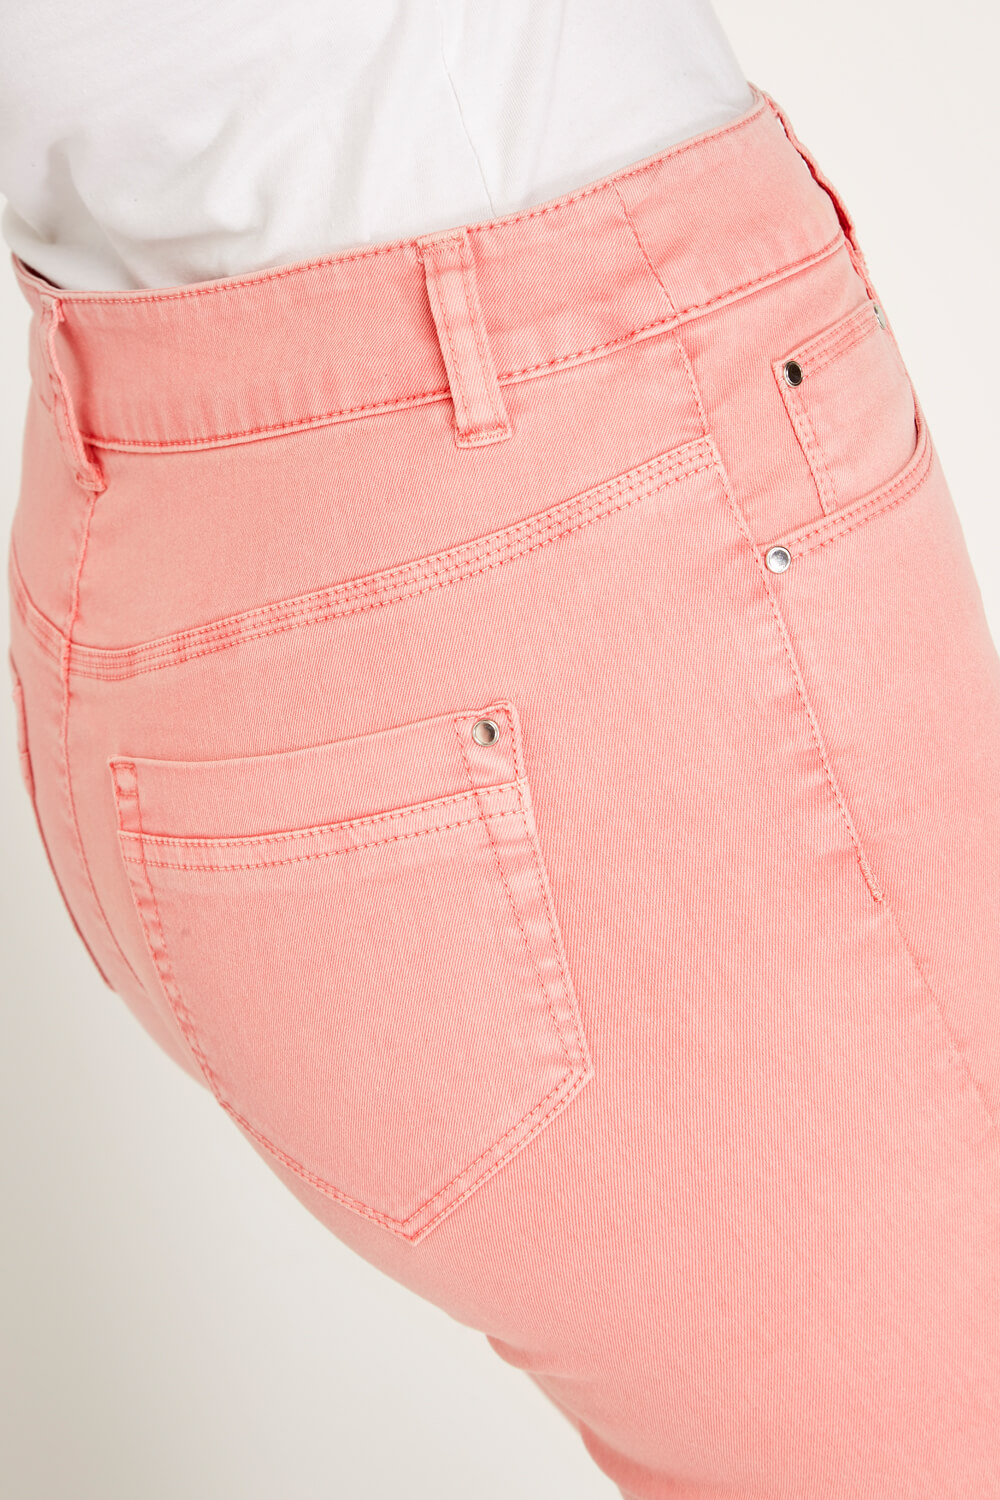 PINK Cropped Jean, Image 3 of 4